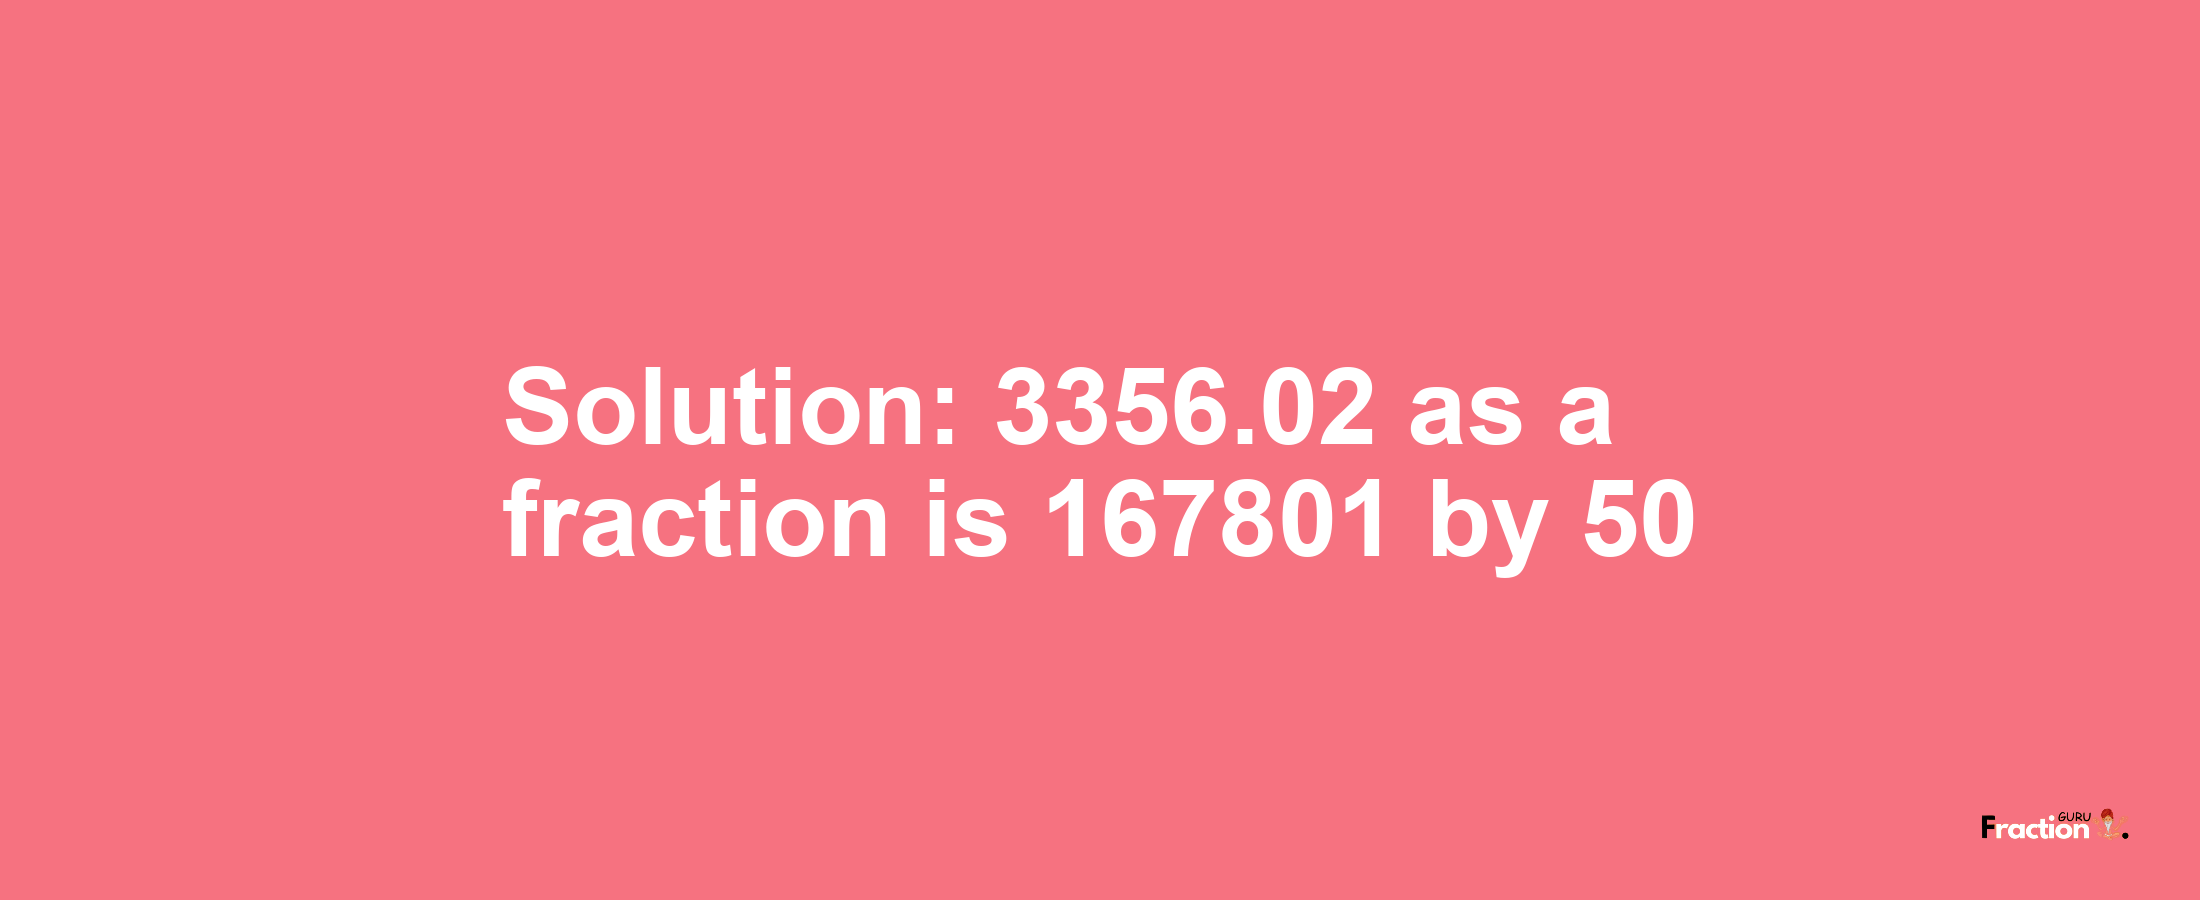 Solution:3356.02 as a fraction is 167801/50